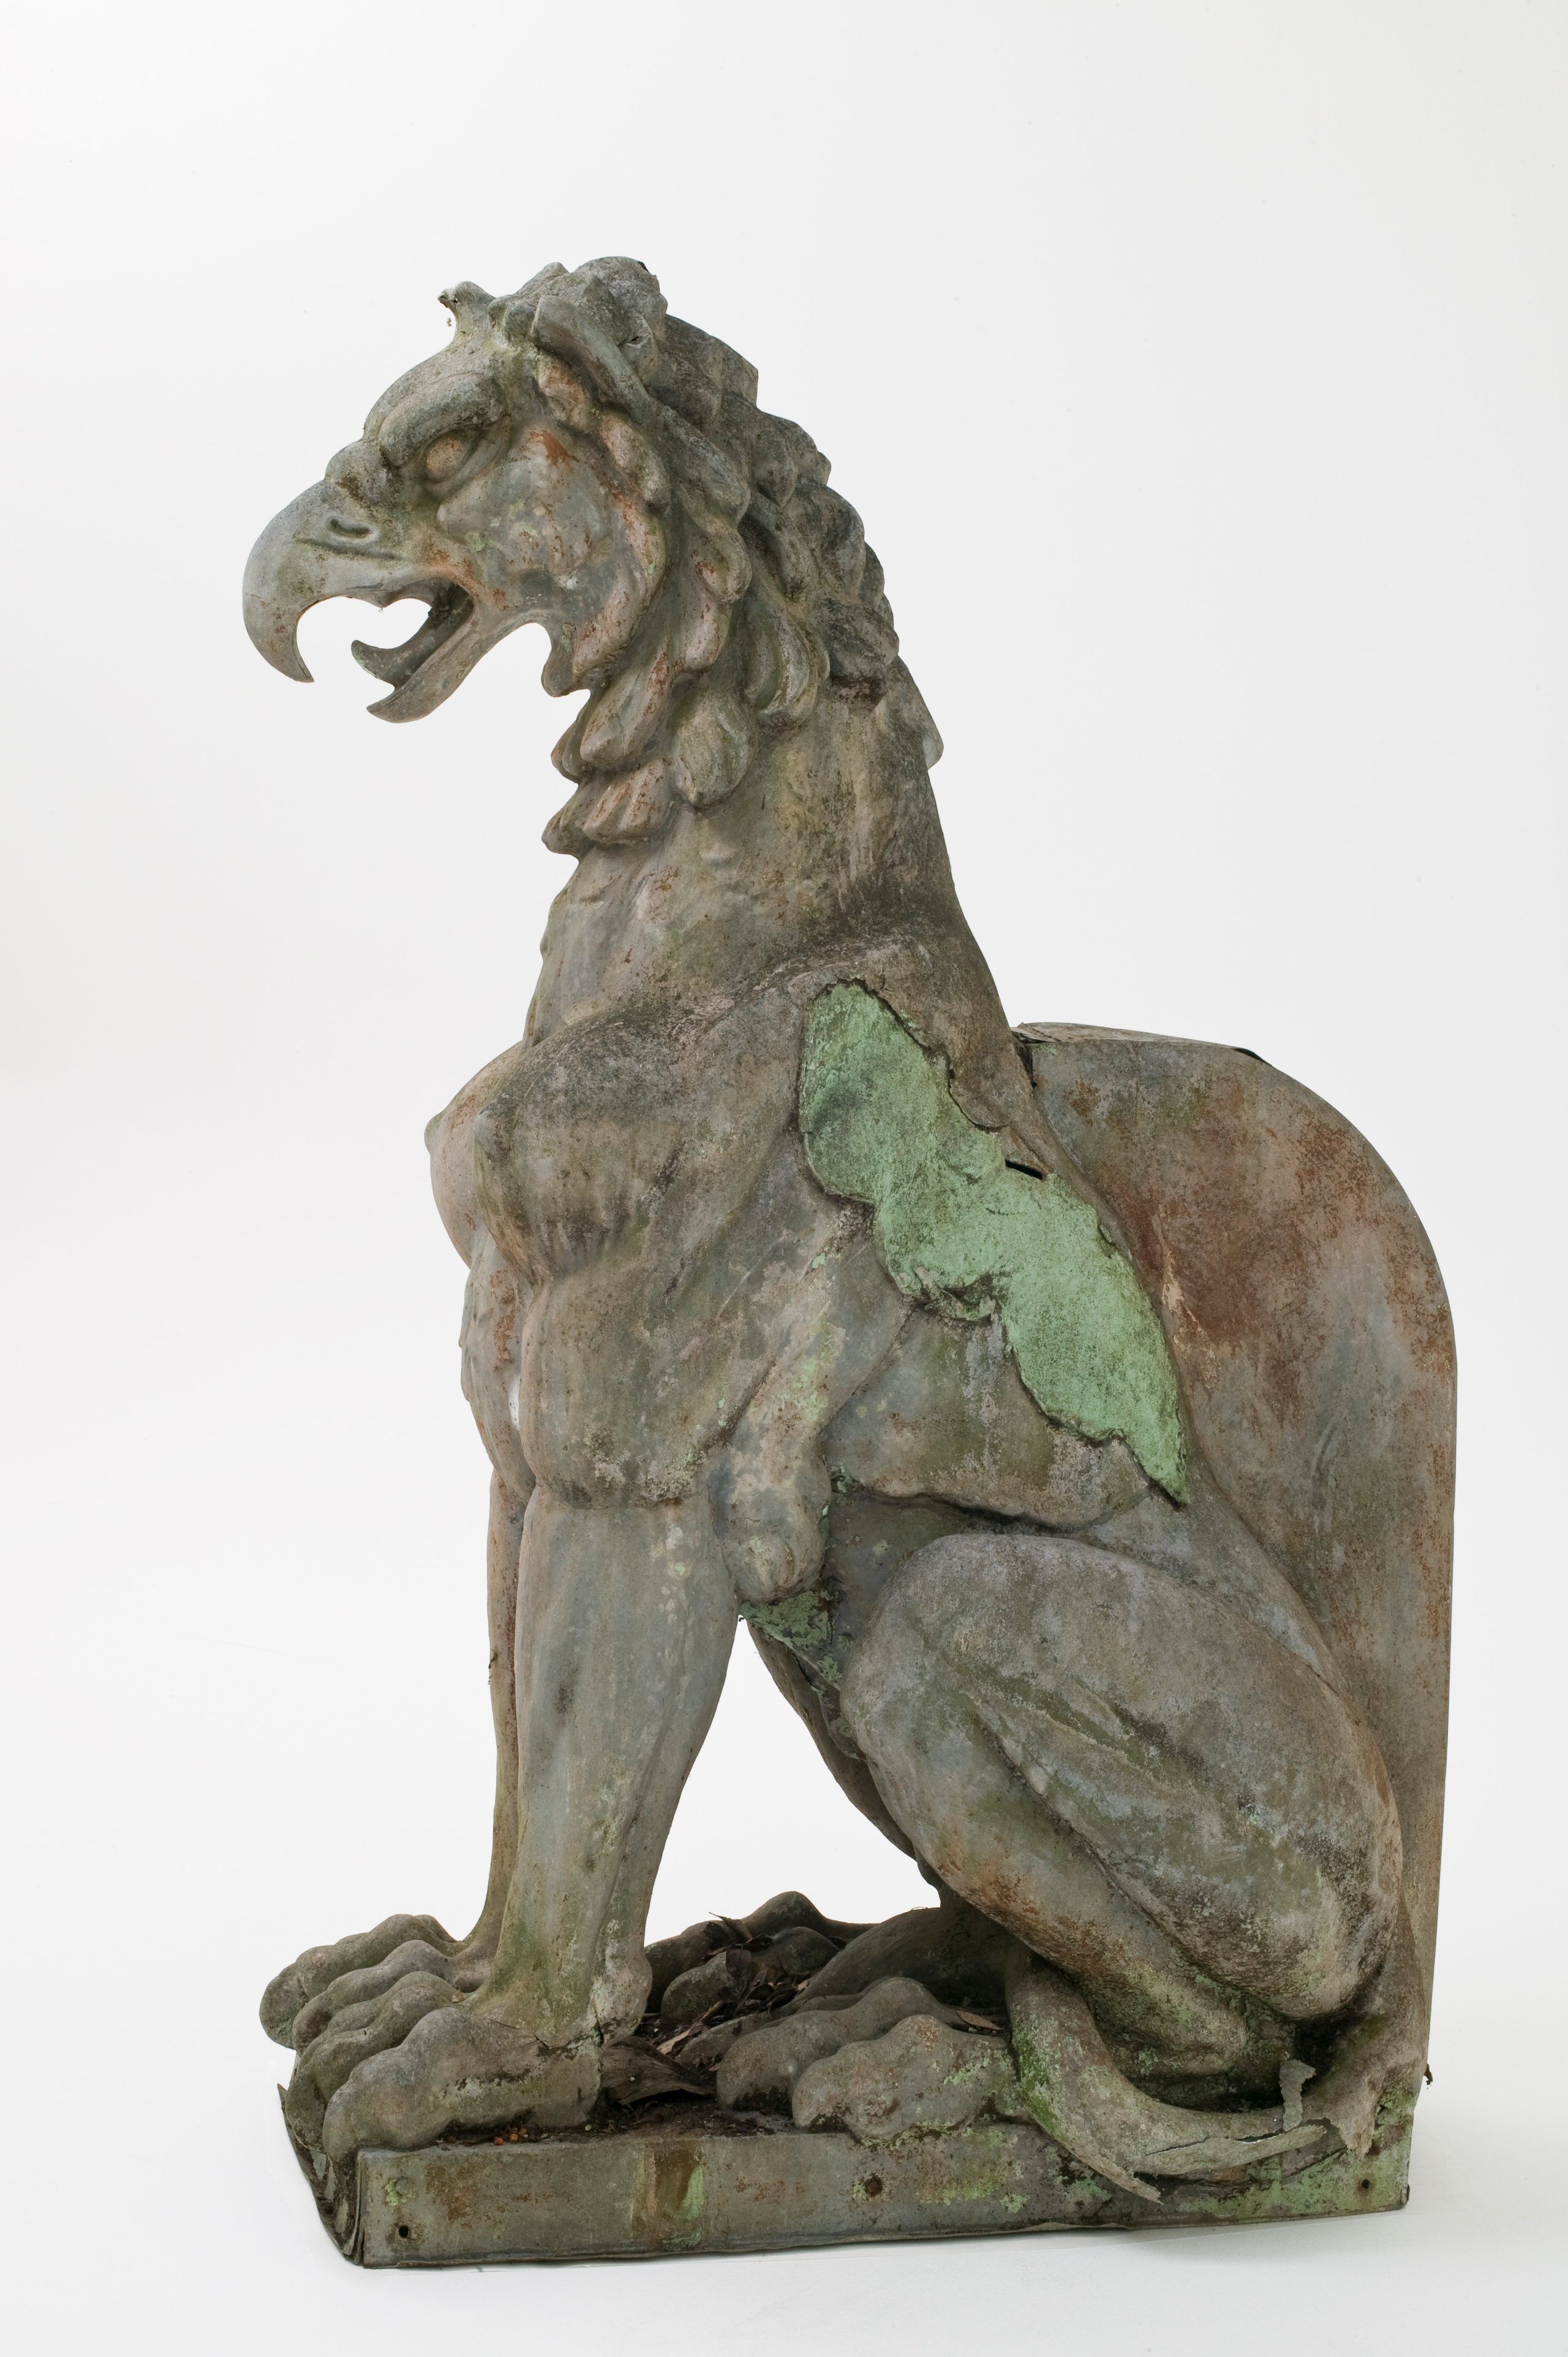 Sculpture of a griffin made by Wunderlich